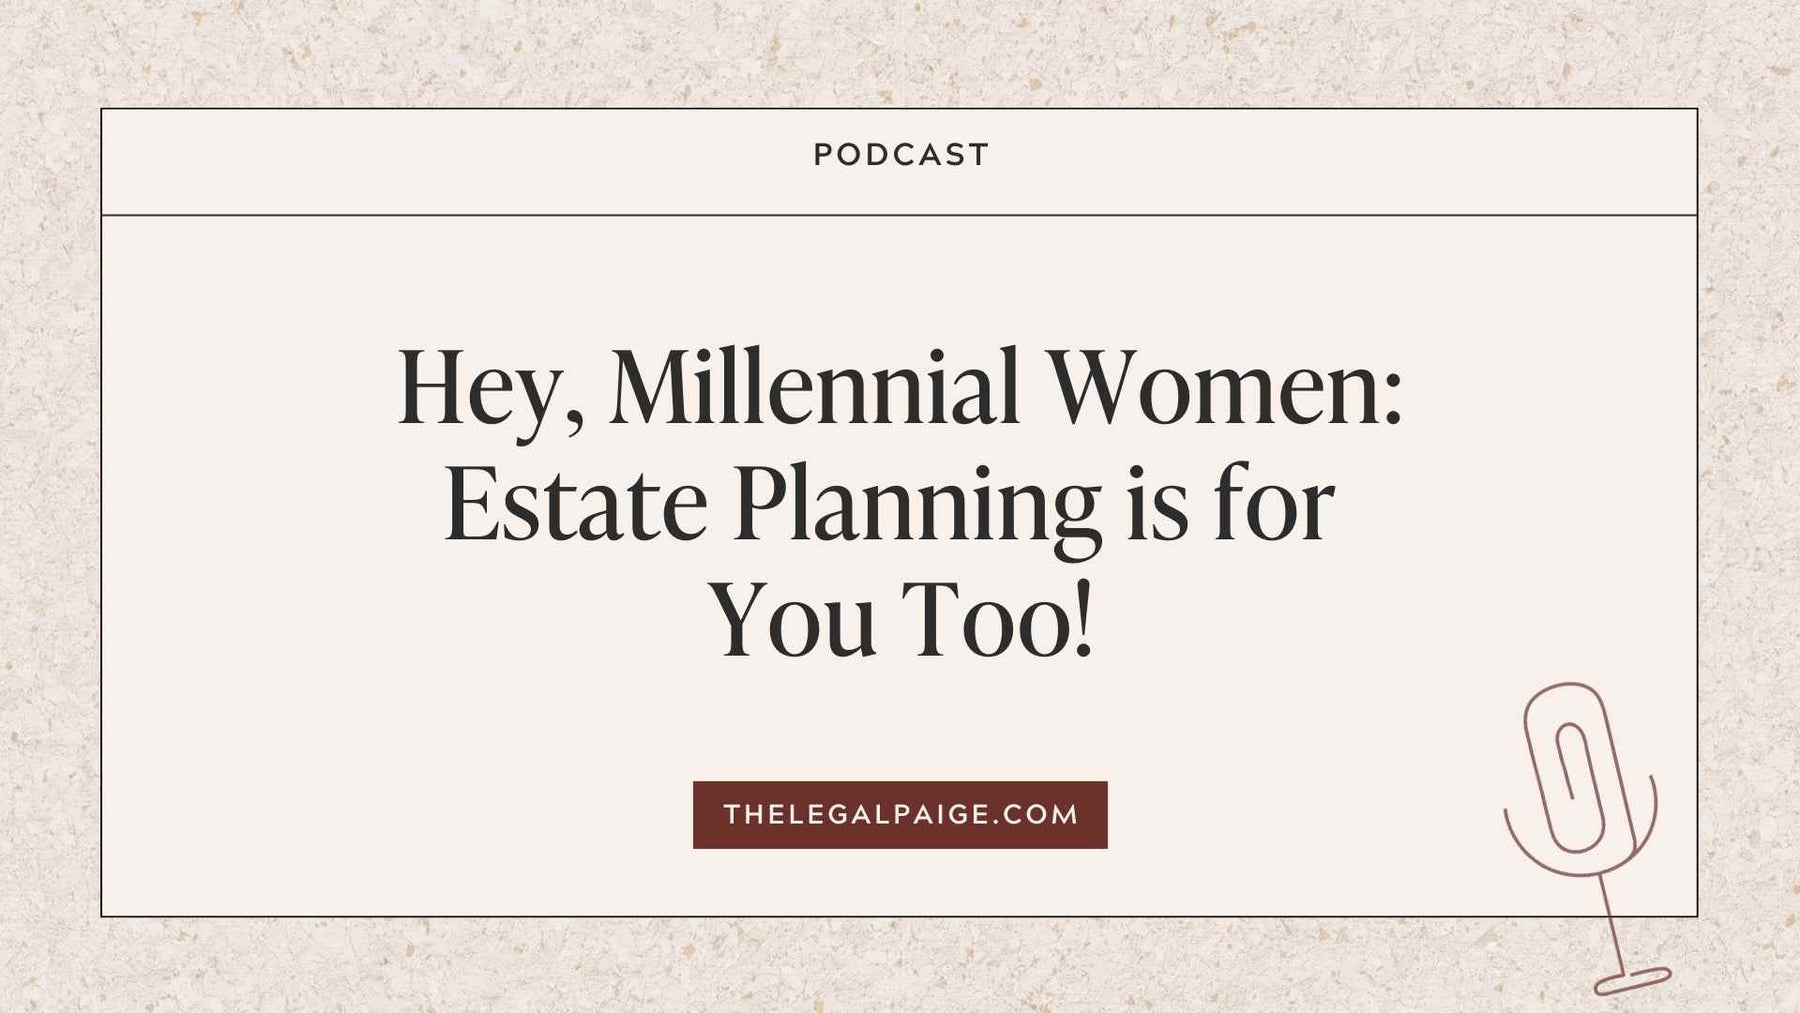 Episode 21: Hey, Millennial Women: Estate Planning is for You Too!